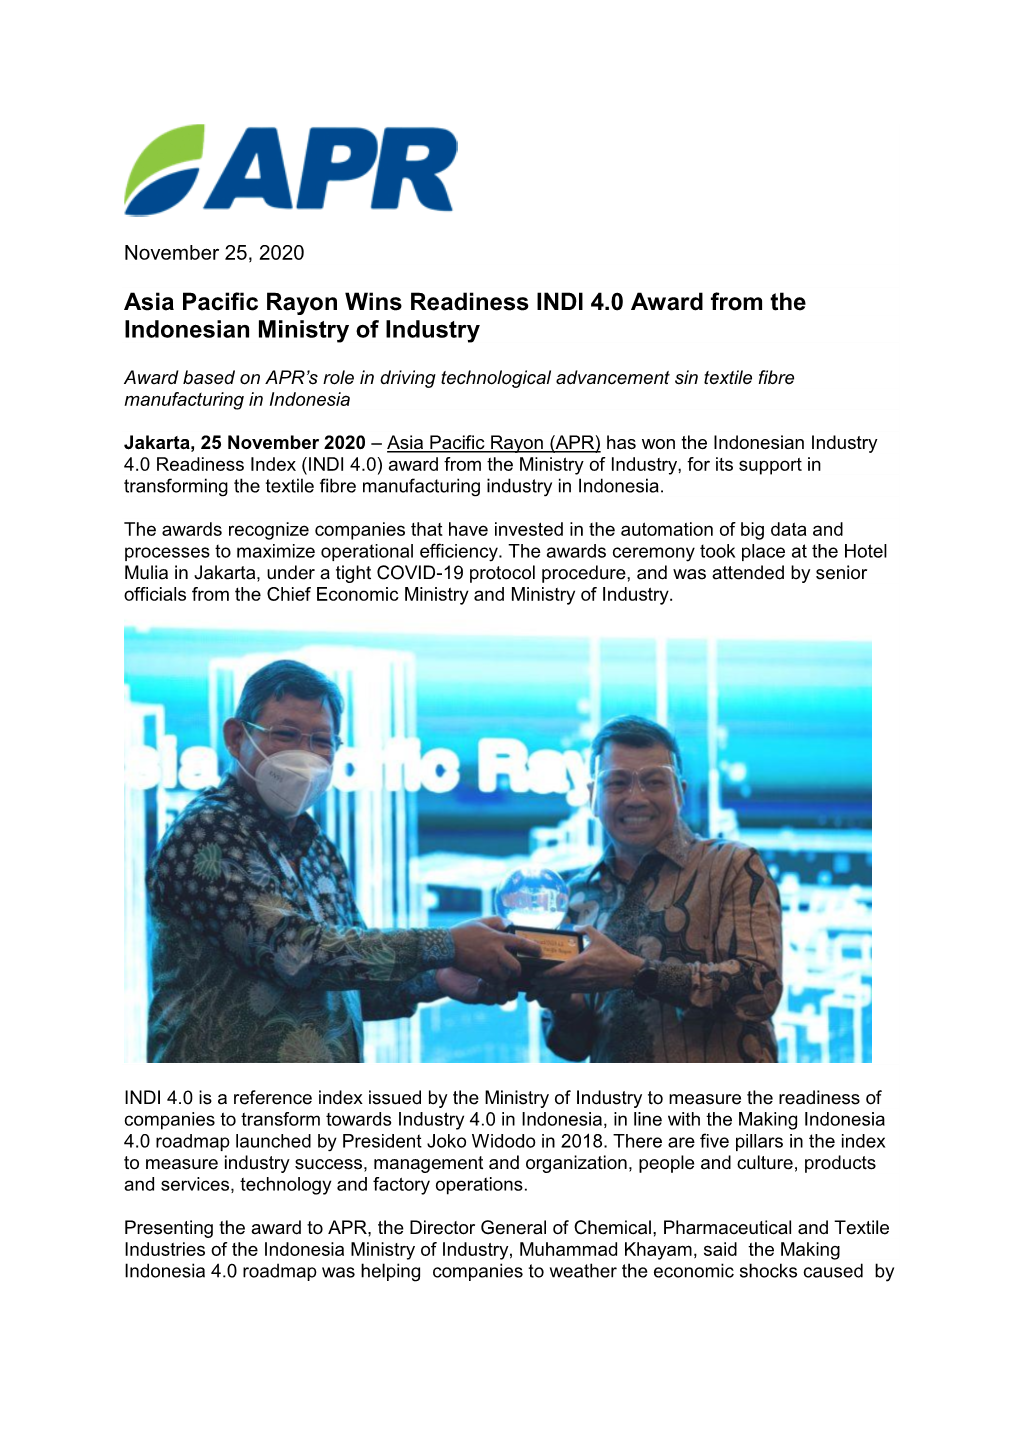 Asia Pacific Rayon Wins Readiness INDI 4.0 Award from the Indonesian Ministry of Industry